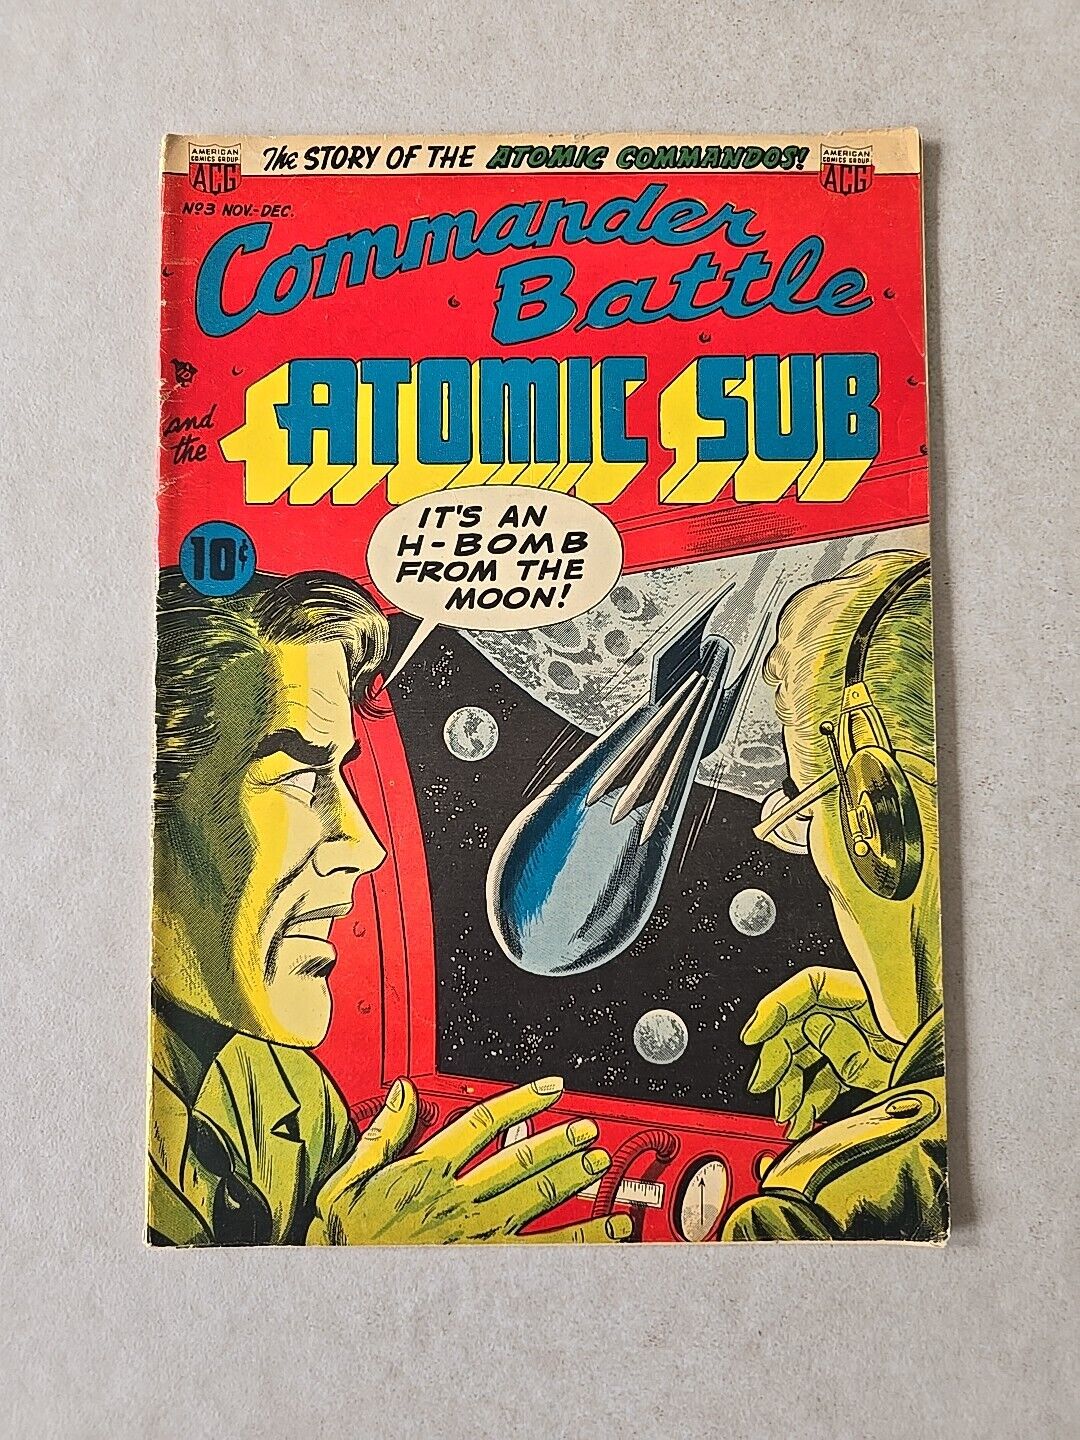 Commander Battle and the Atomic Sub #3  1954 Golden Age Comic 